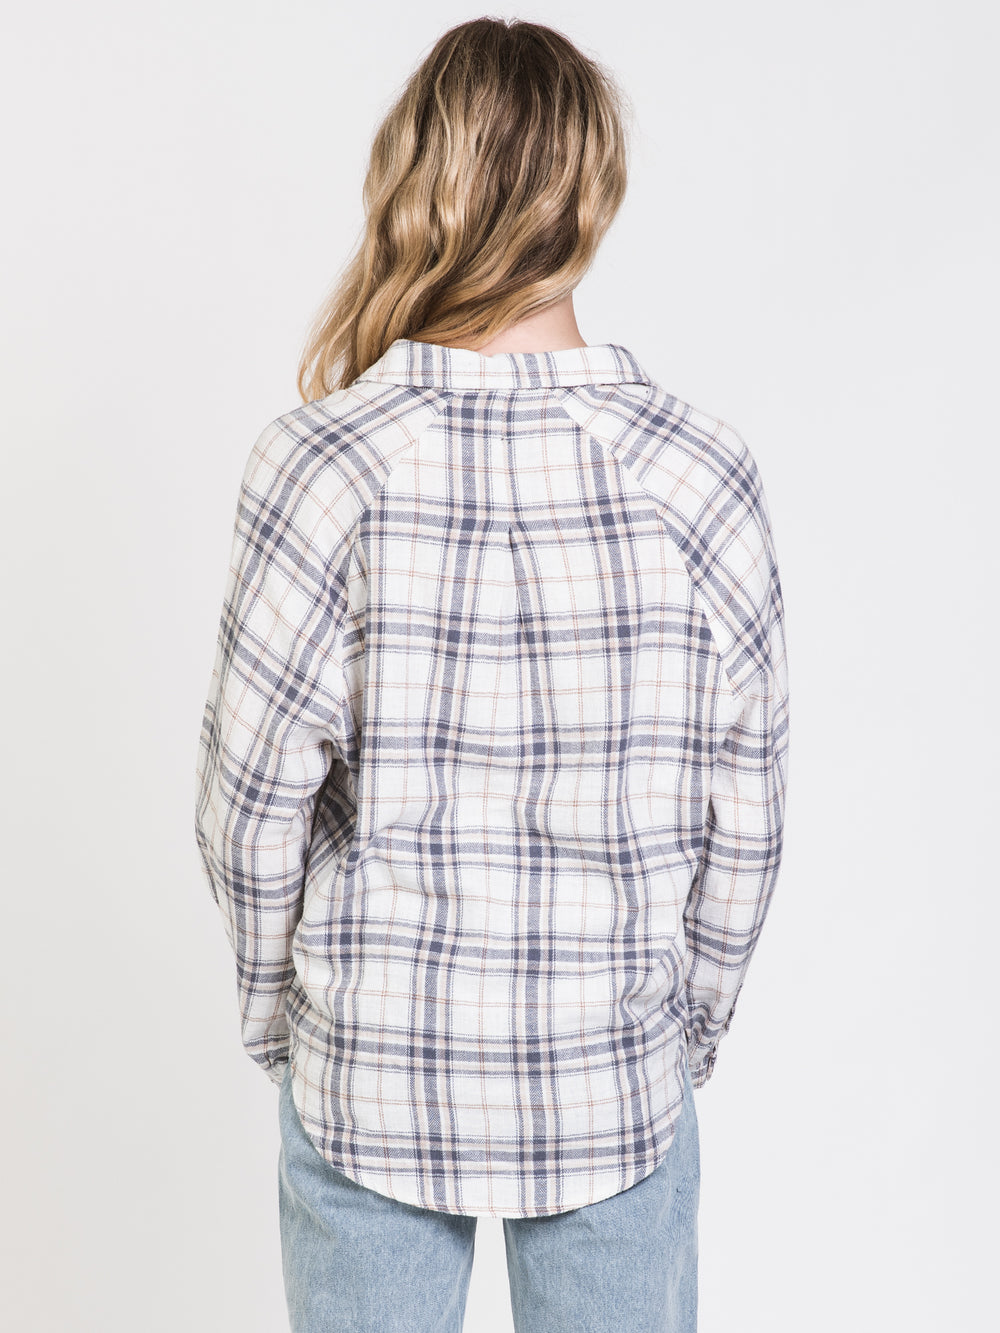 HARLOW KENDALL OVERSIZED FLANNEL - CLEARANCE